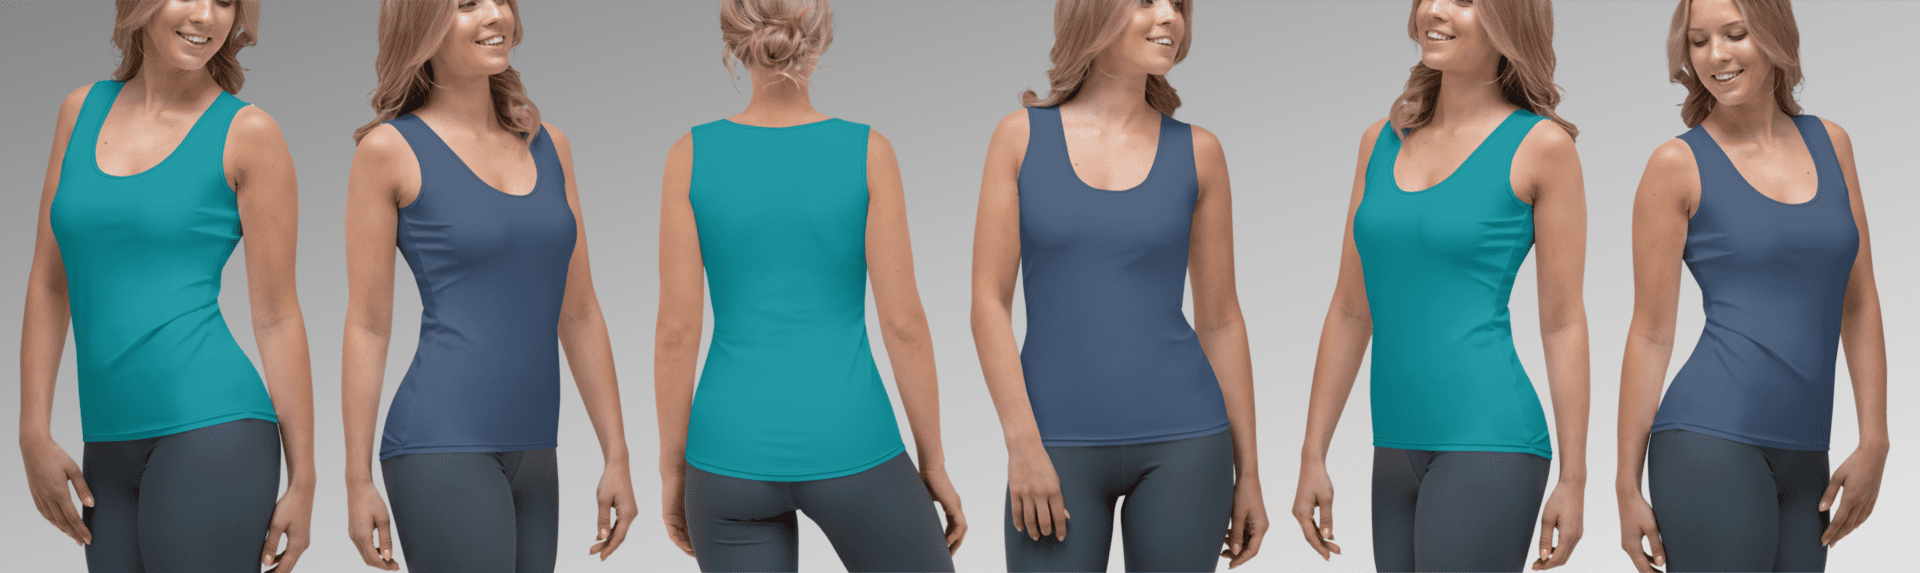 Women in blue and green tank tops.